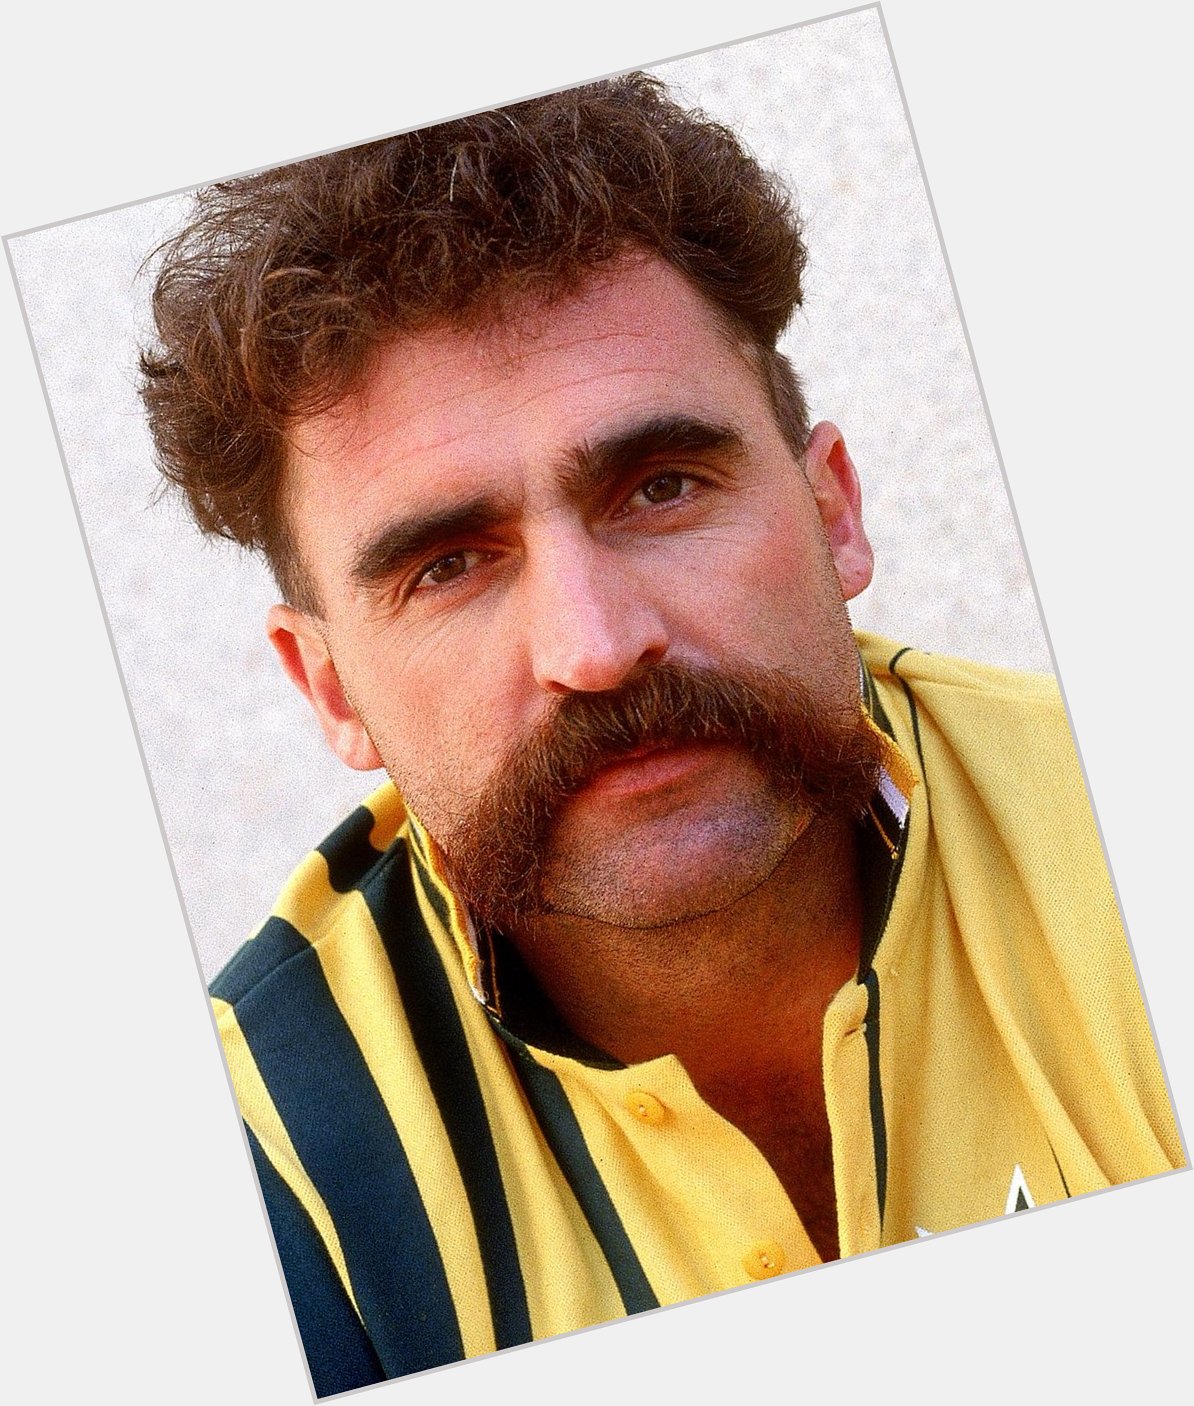 Happy 54th Birthday to cricketer Merv Hughes. A legend with a great moustache 